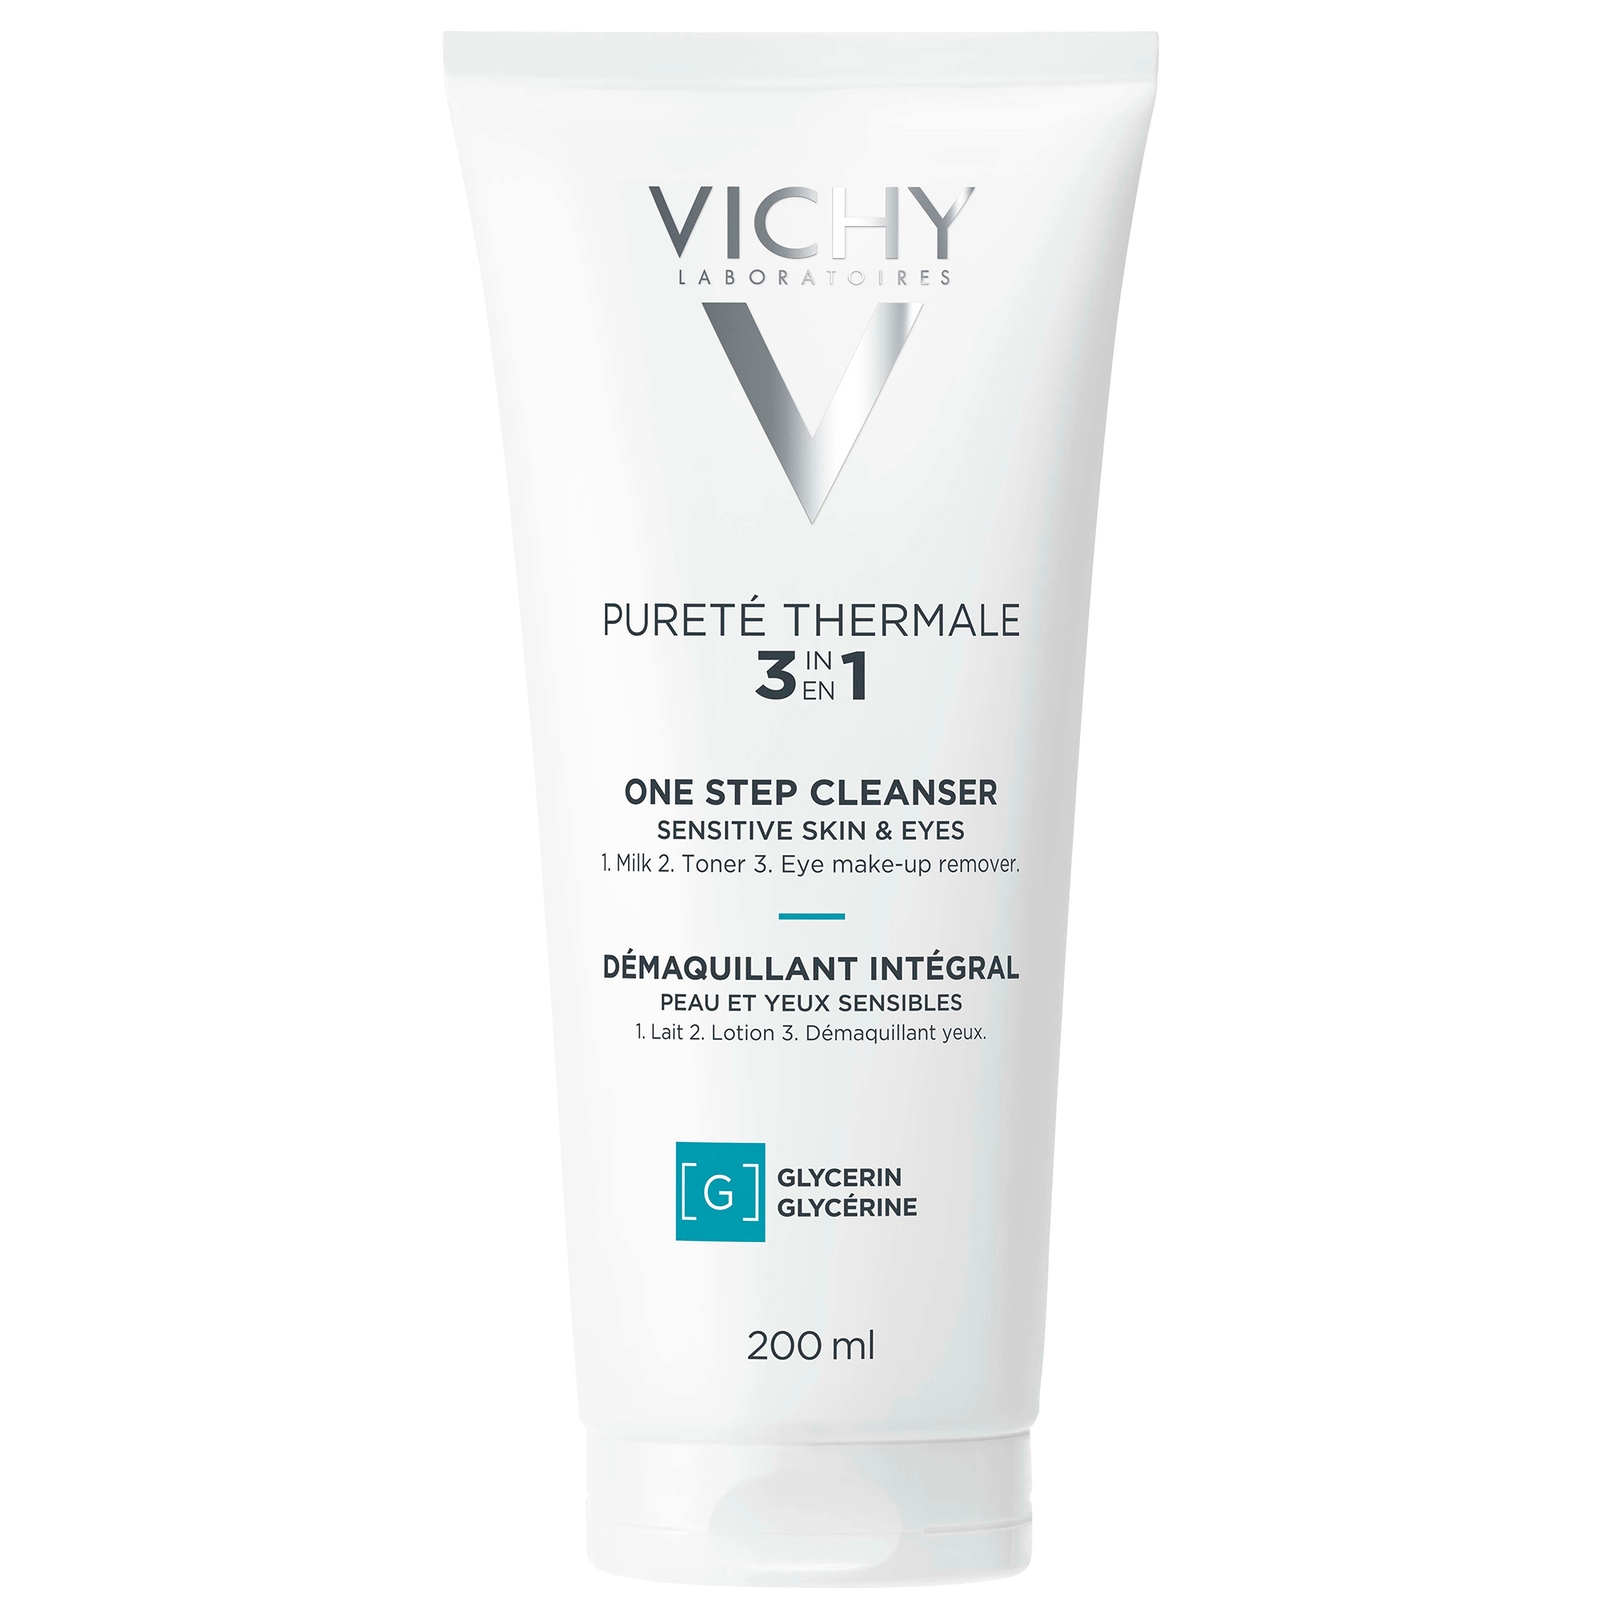 Photos - Facial / Body Cleansing Product Vichy Pureté Thermale 3-in-1 One Step Cleanser 200ml M4934520 